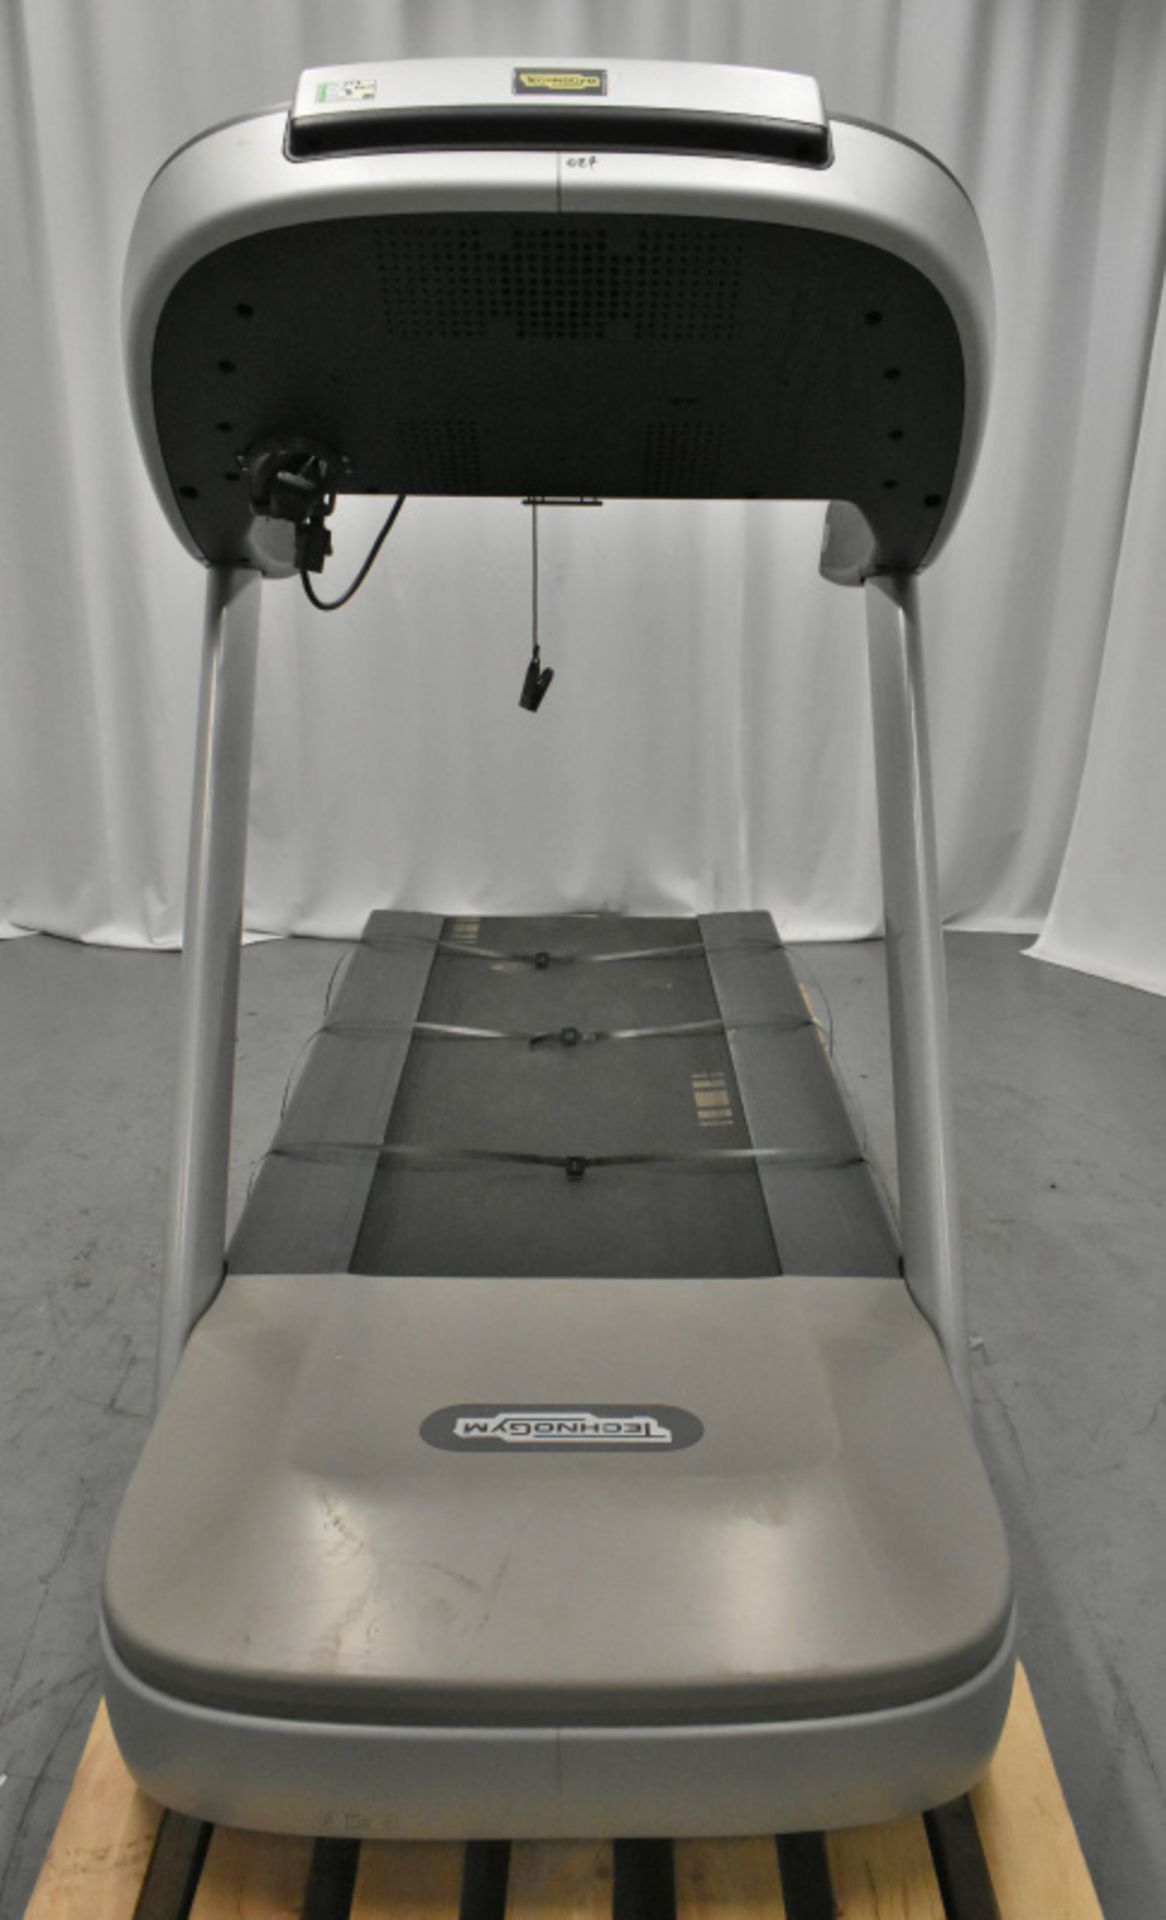 Technogym Treadmill - Please check pictures for overall condition - Image 6 of 9